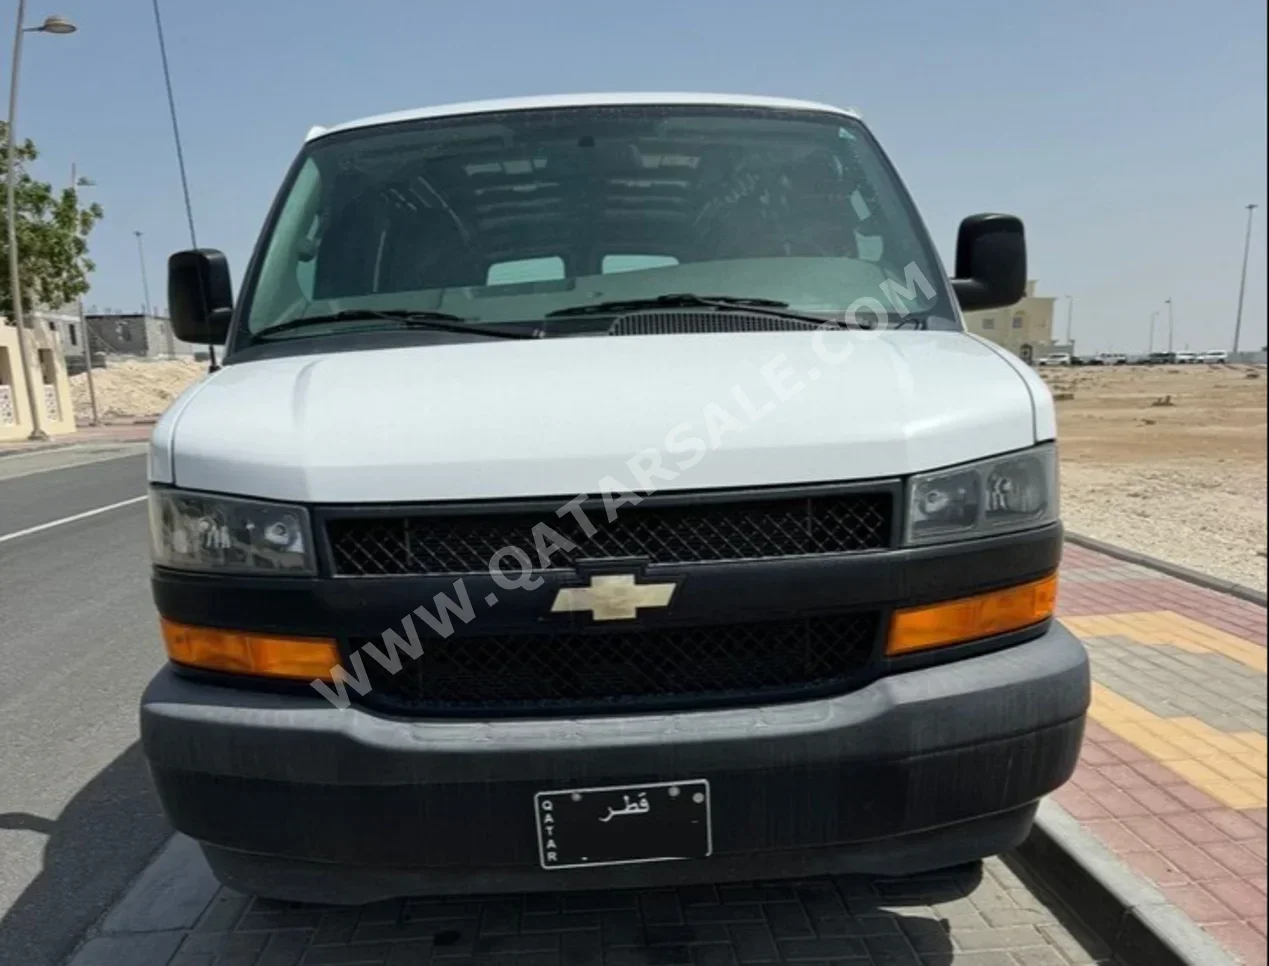 Chevrolet  Express  2020  Automatic  14,000 Km  8 Cylinder  Rear Wheel Drive (RWD)  Van / Bus  White  With Warranty